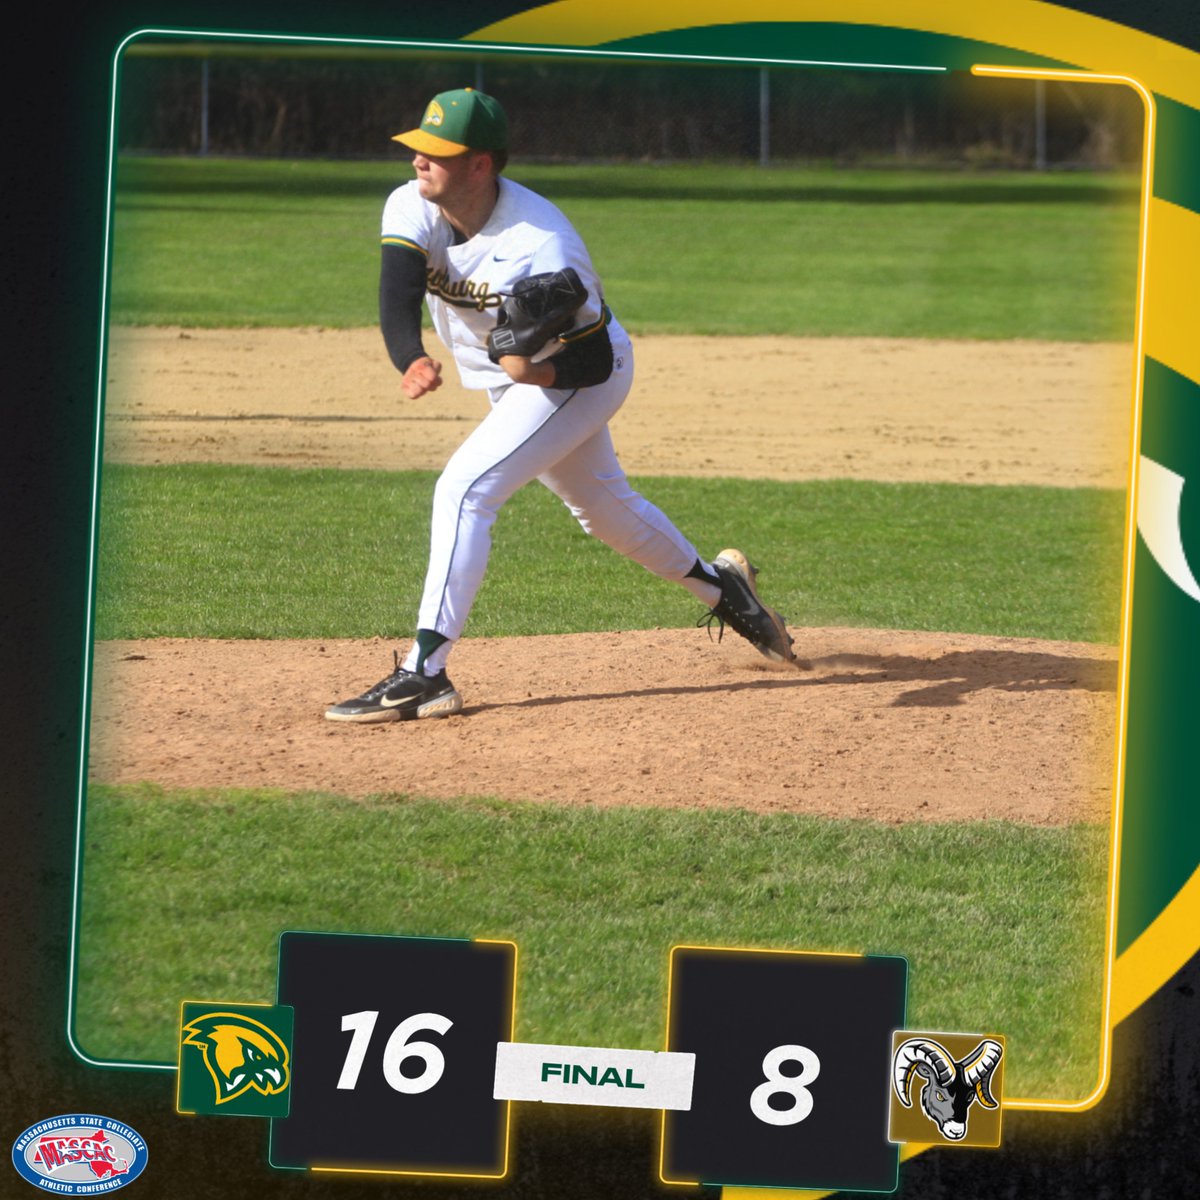 ⚾️Final Score⚾️
The @FSUFalconsBSB team earned a 16-8 victory over the Rams of Framingham State this afternoon on senior day.
#SeniorDay #FearTheFlock #TheFalconWay